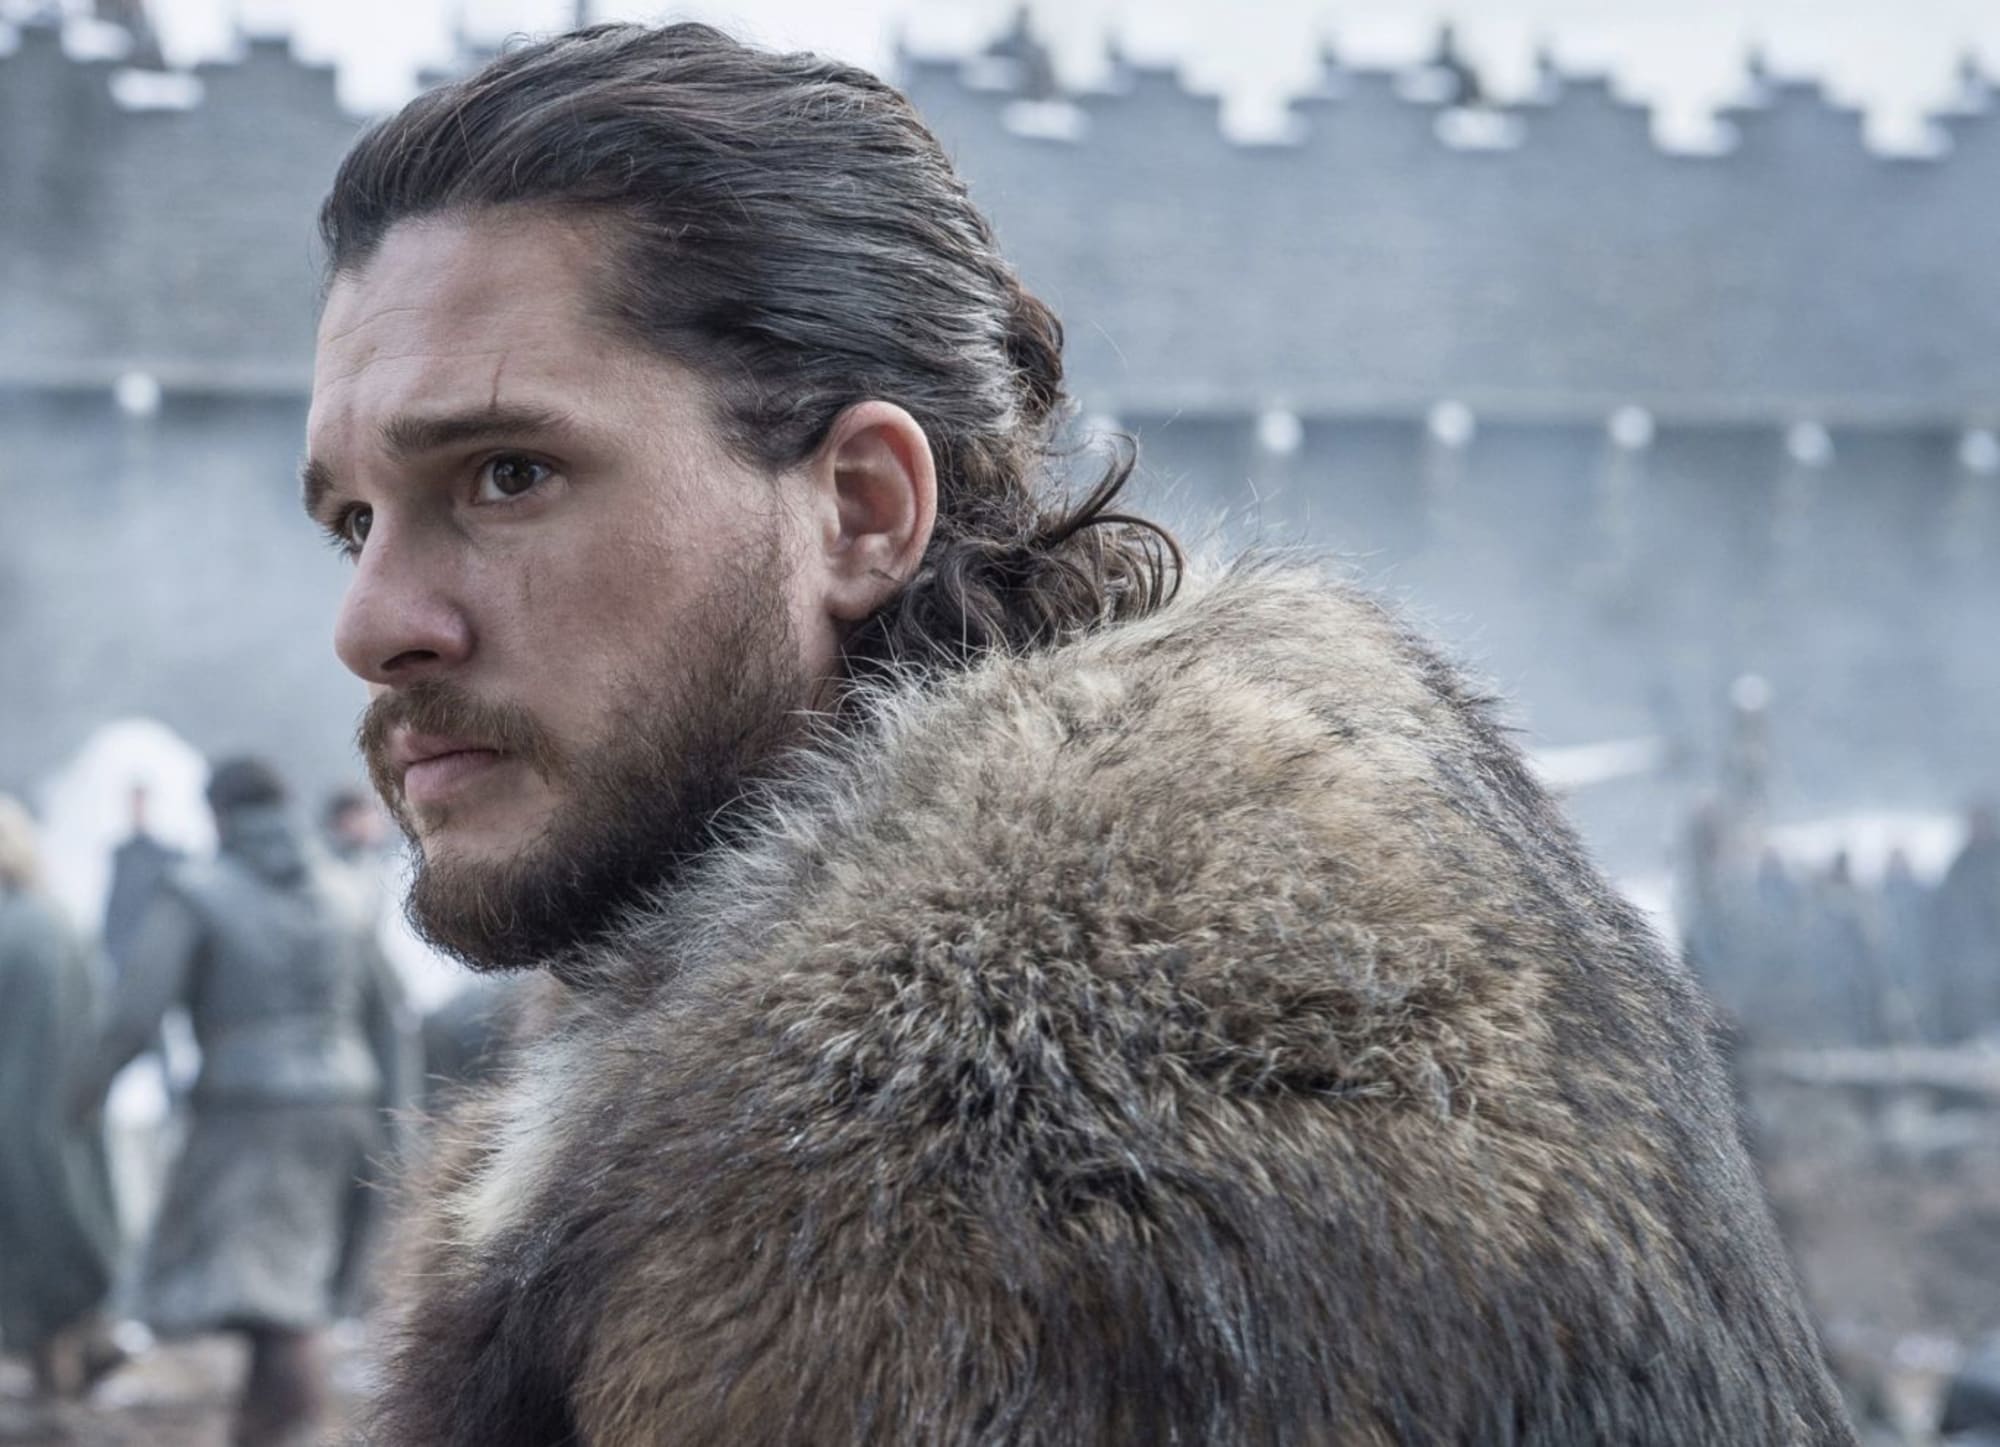 Kit Harington: House of the Dragon is “hard for me to watch”